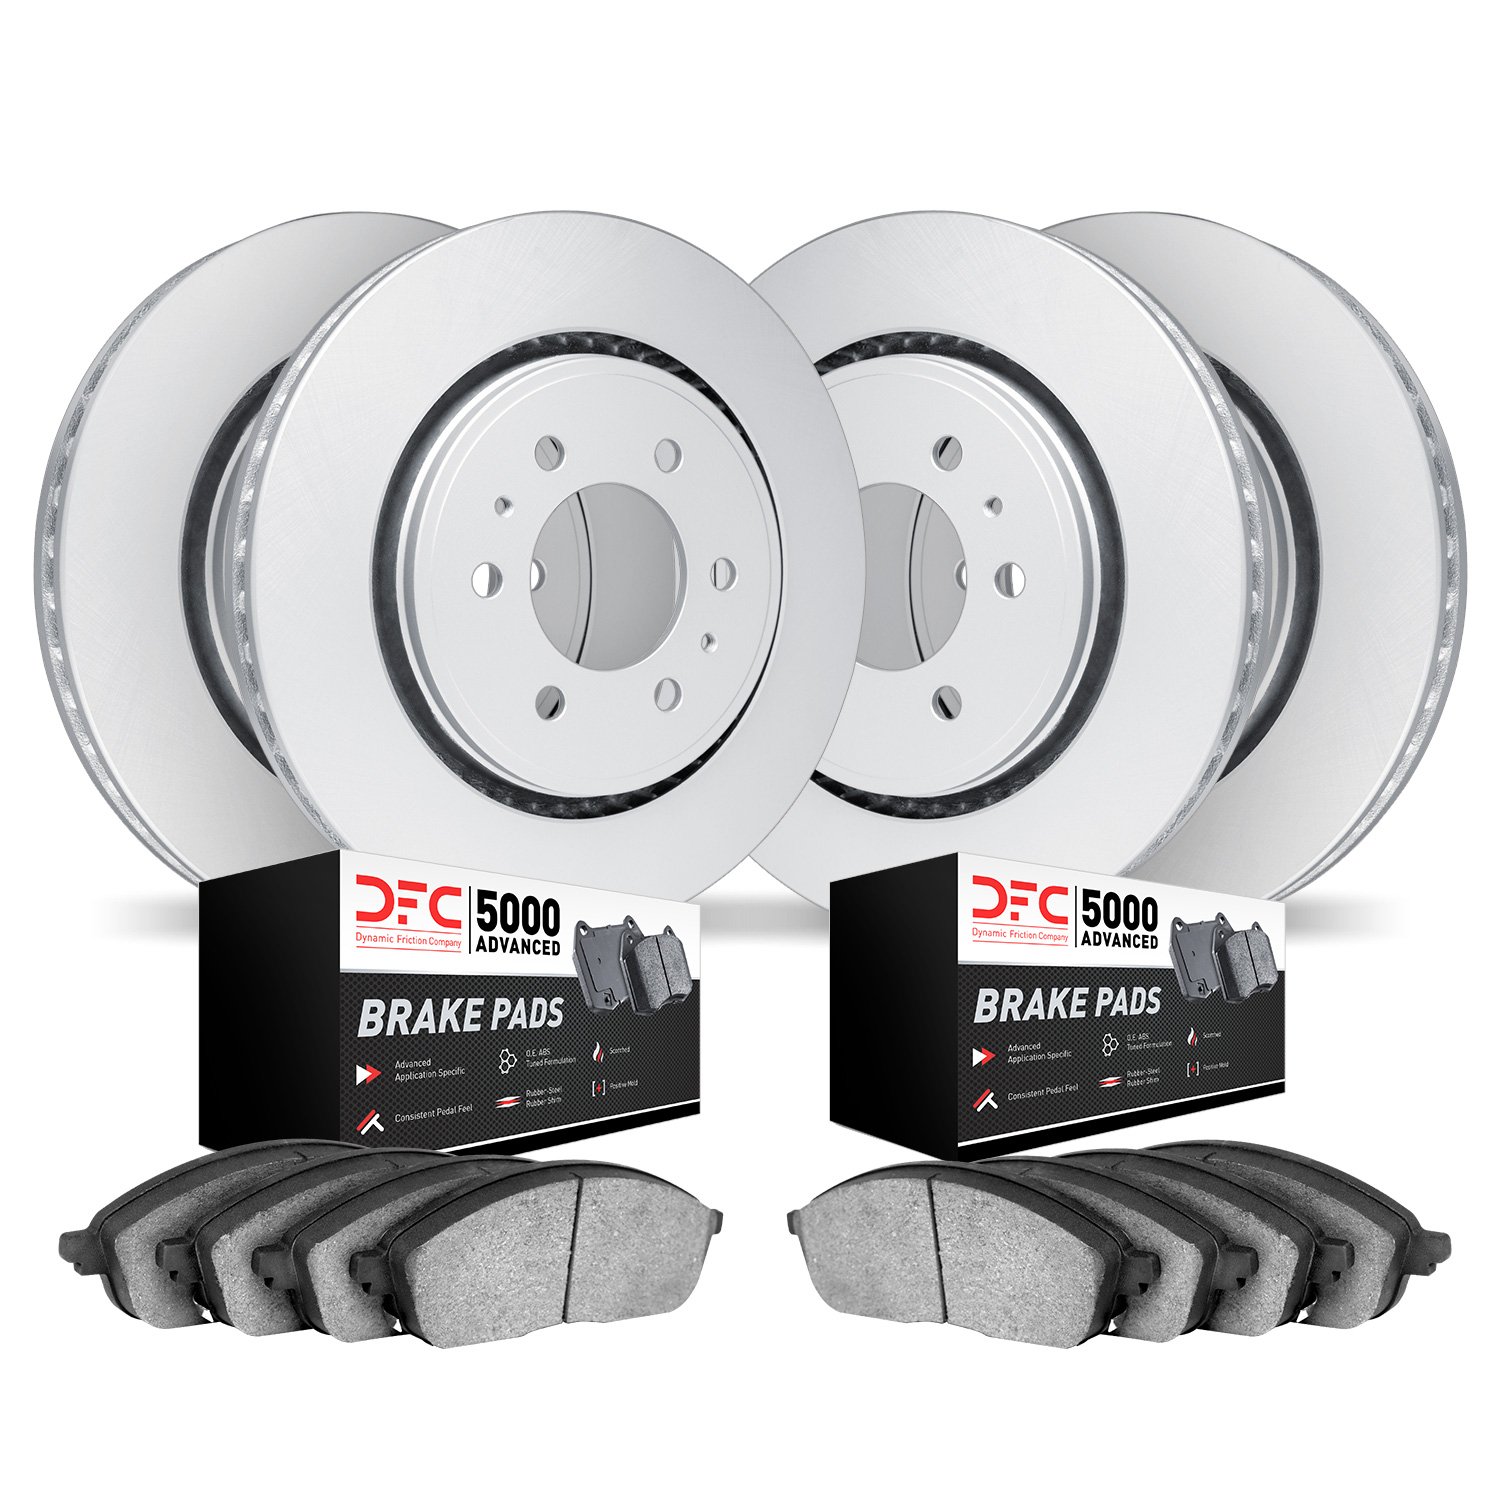 4504-54296 Geospec Brake Rotors w/5000 Advanced Brake Pads Kit, Fits Select Ford/Lincoln/Mercury/Mazda, Position: Front and Rear